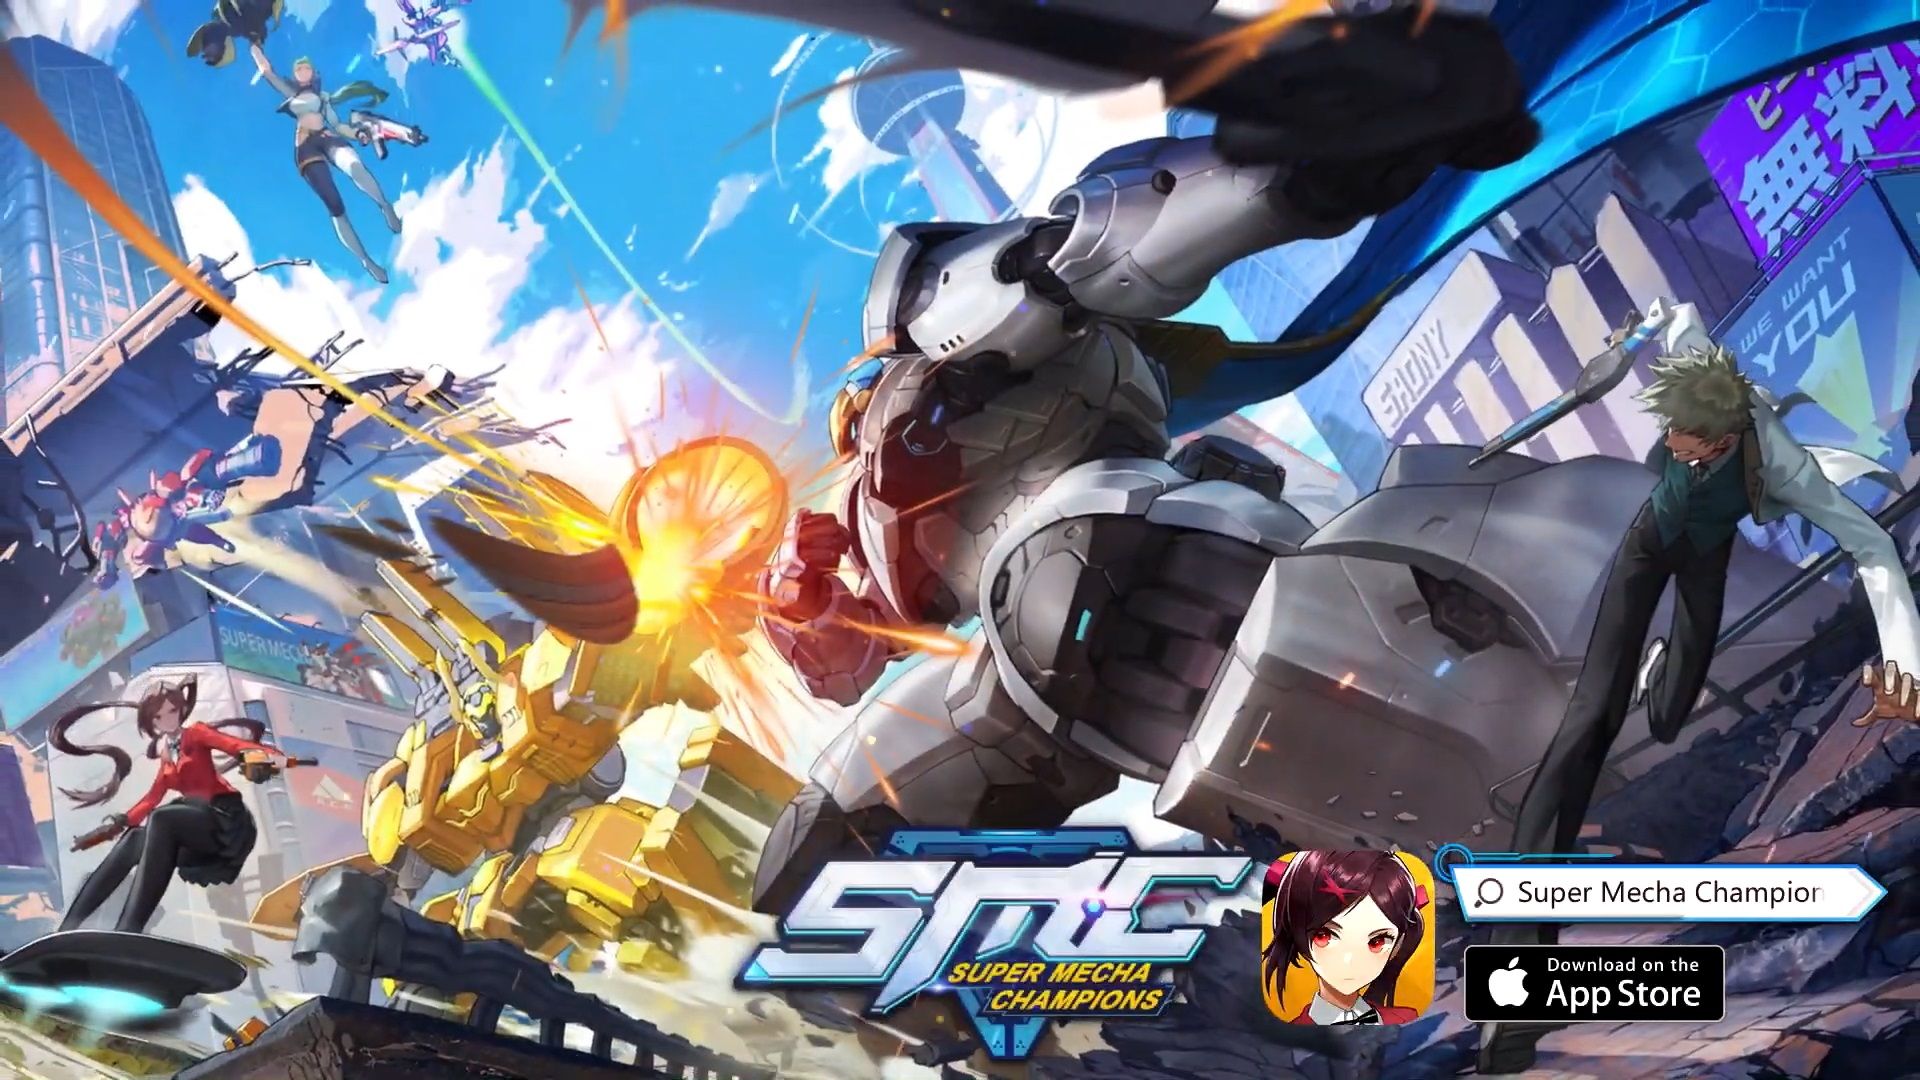 Action Shooter, Super Mecha Champions, Achieves Top Recommendations in App Store and Google Play Store